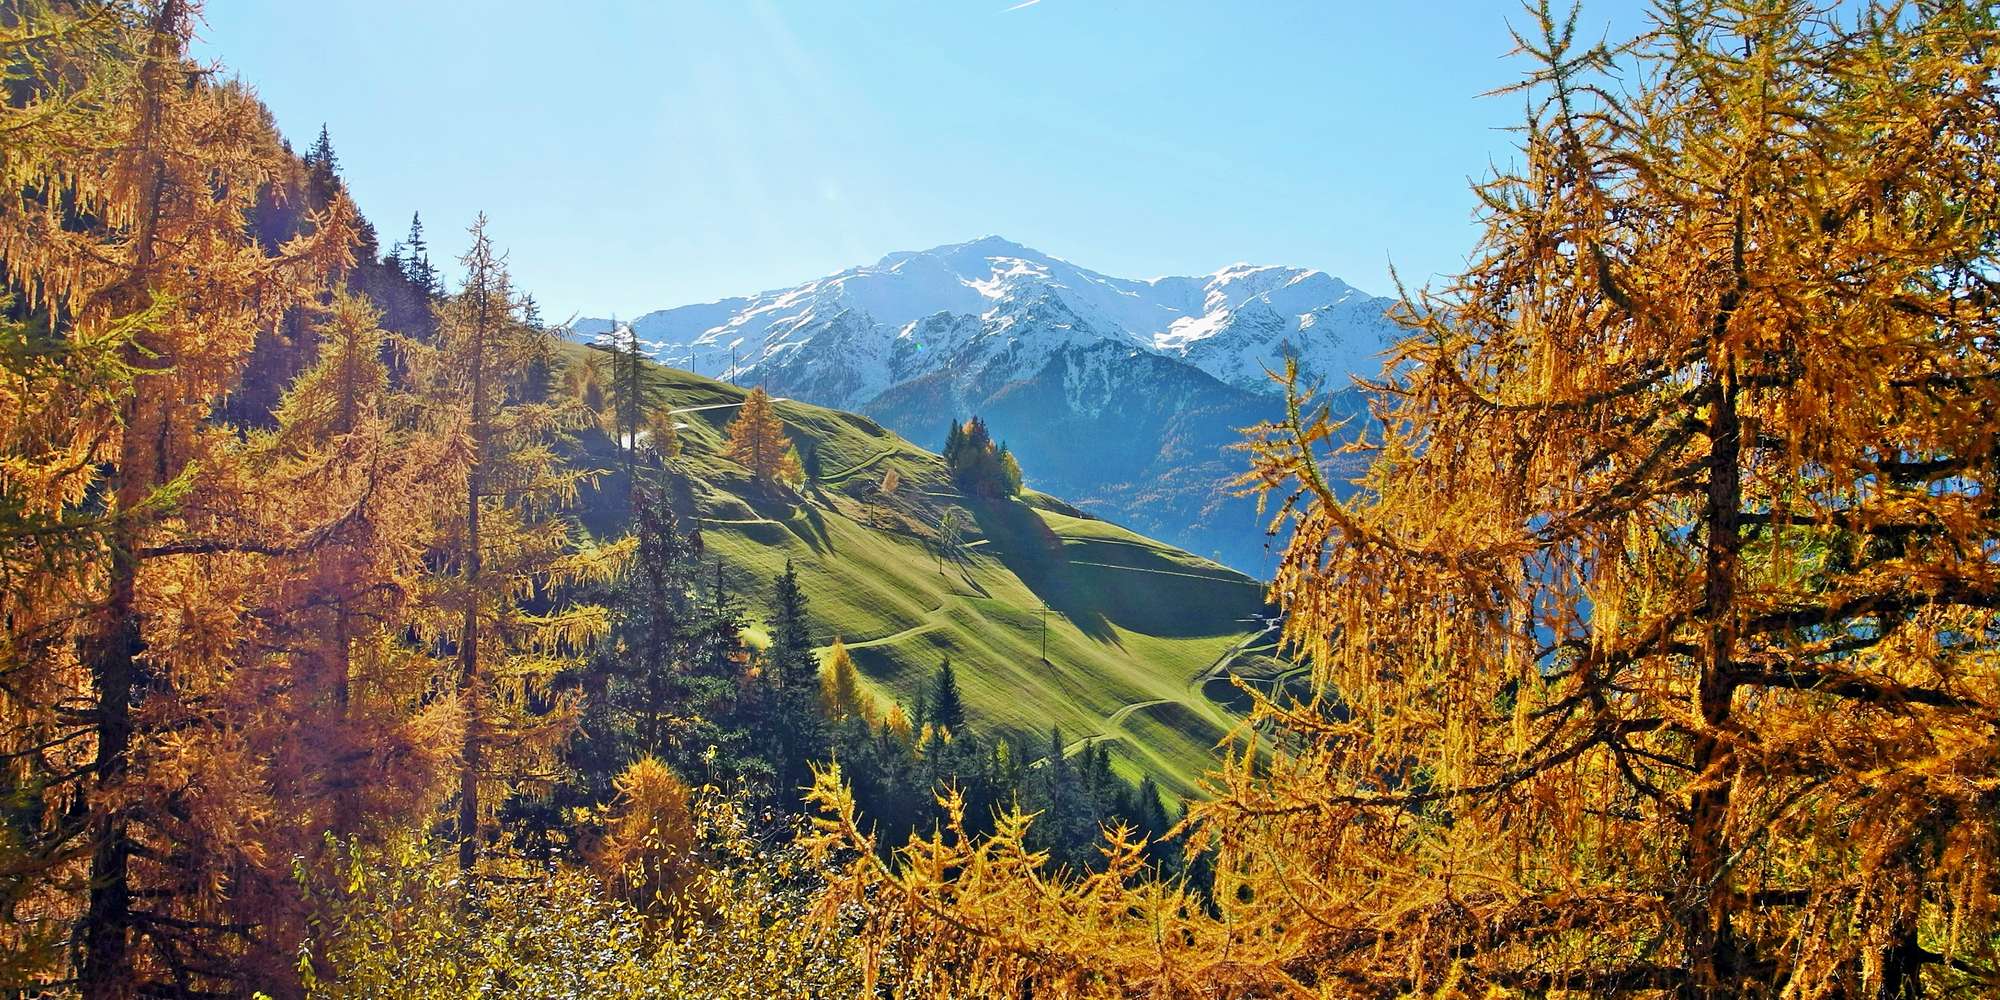 Autumn holidays in South Tyrol: Offers to enjoy